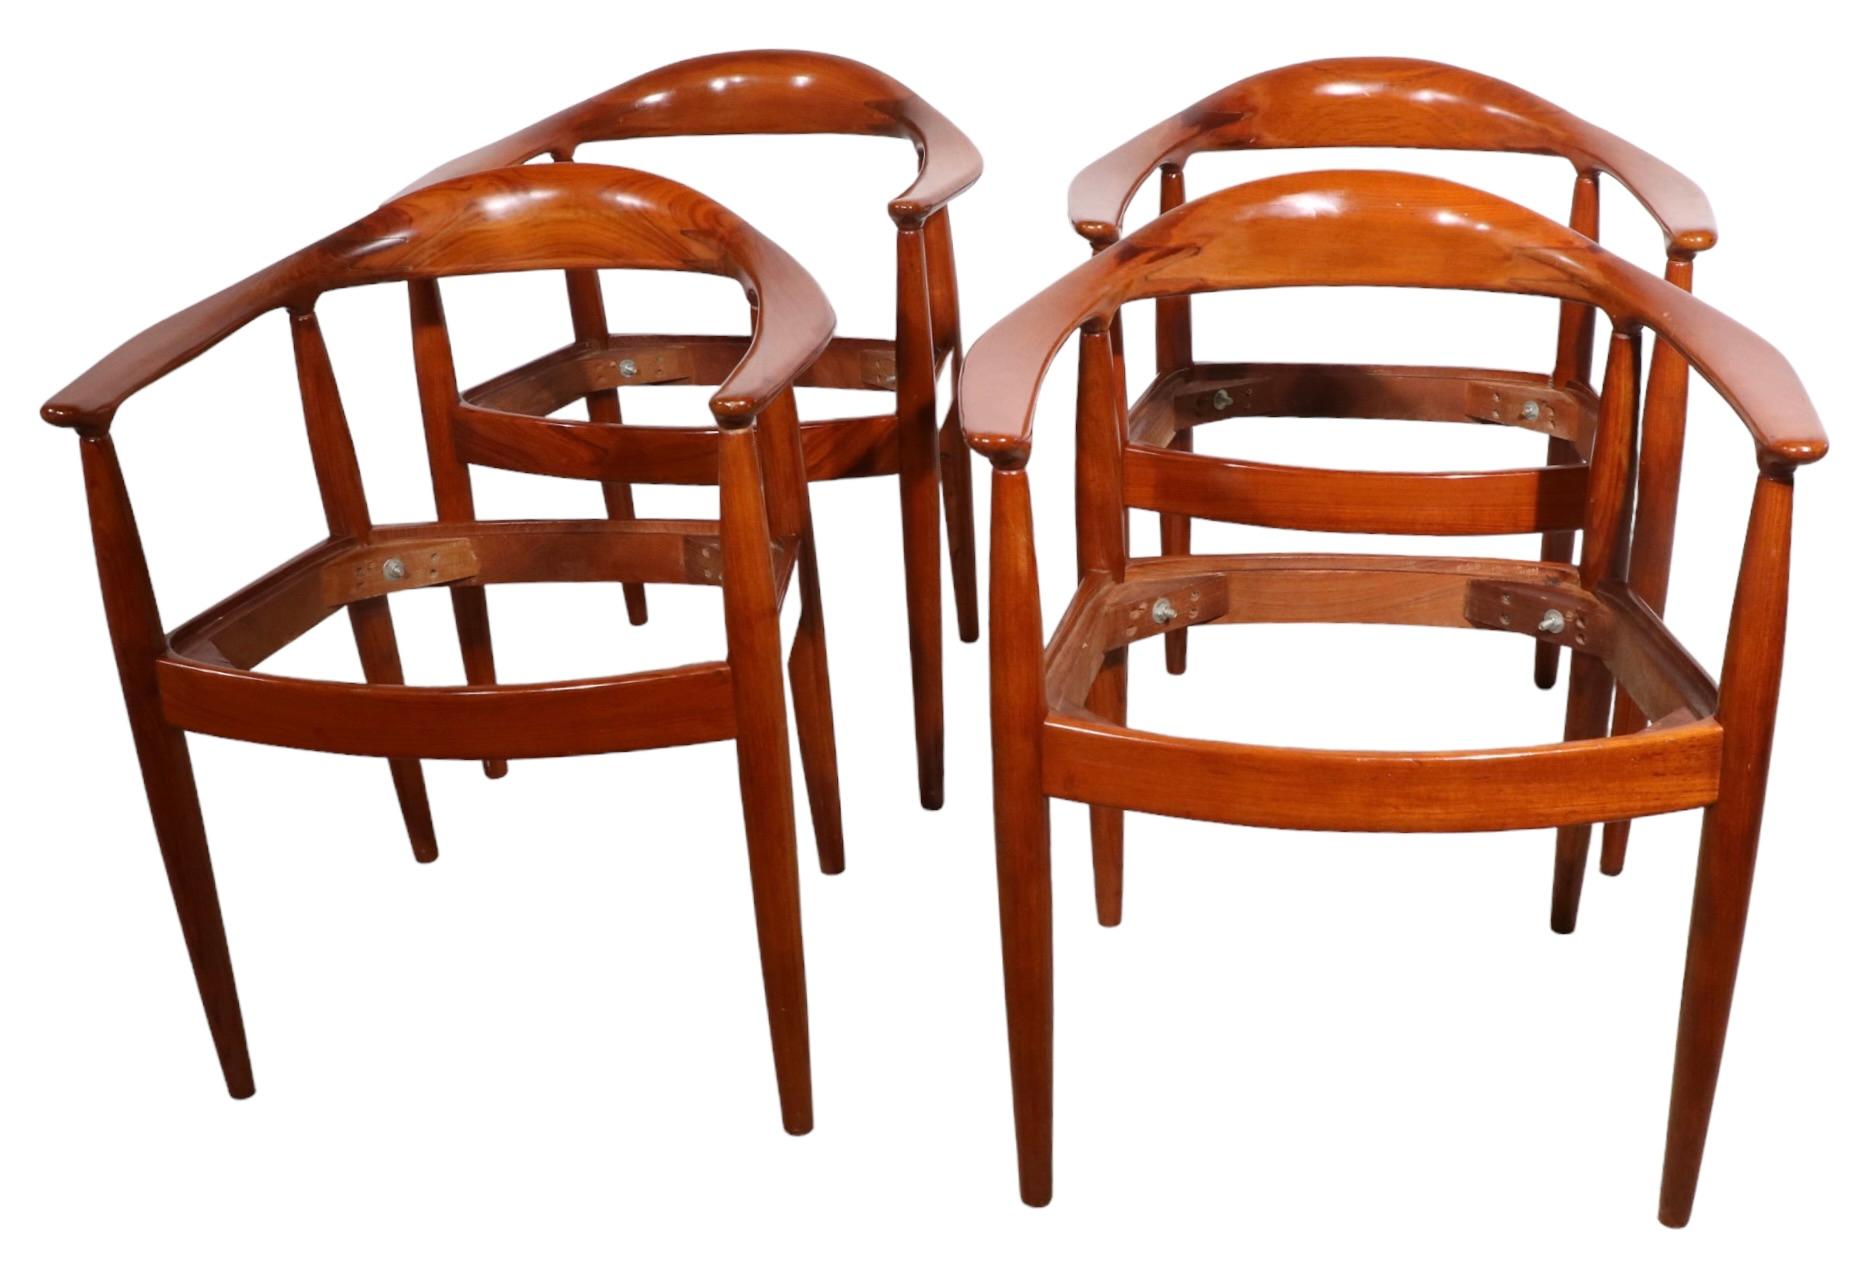 Set of four mid century dining chairs made in the style of Hans Werner's iconic design known as The Chair. These chairs are well crafted and well proportioned, they are from the period ( mid 20th C ) - we believe they are after the originals, they